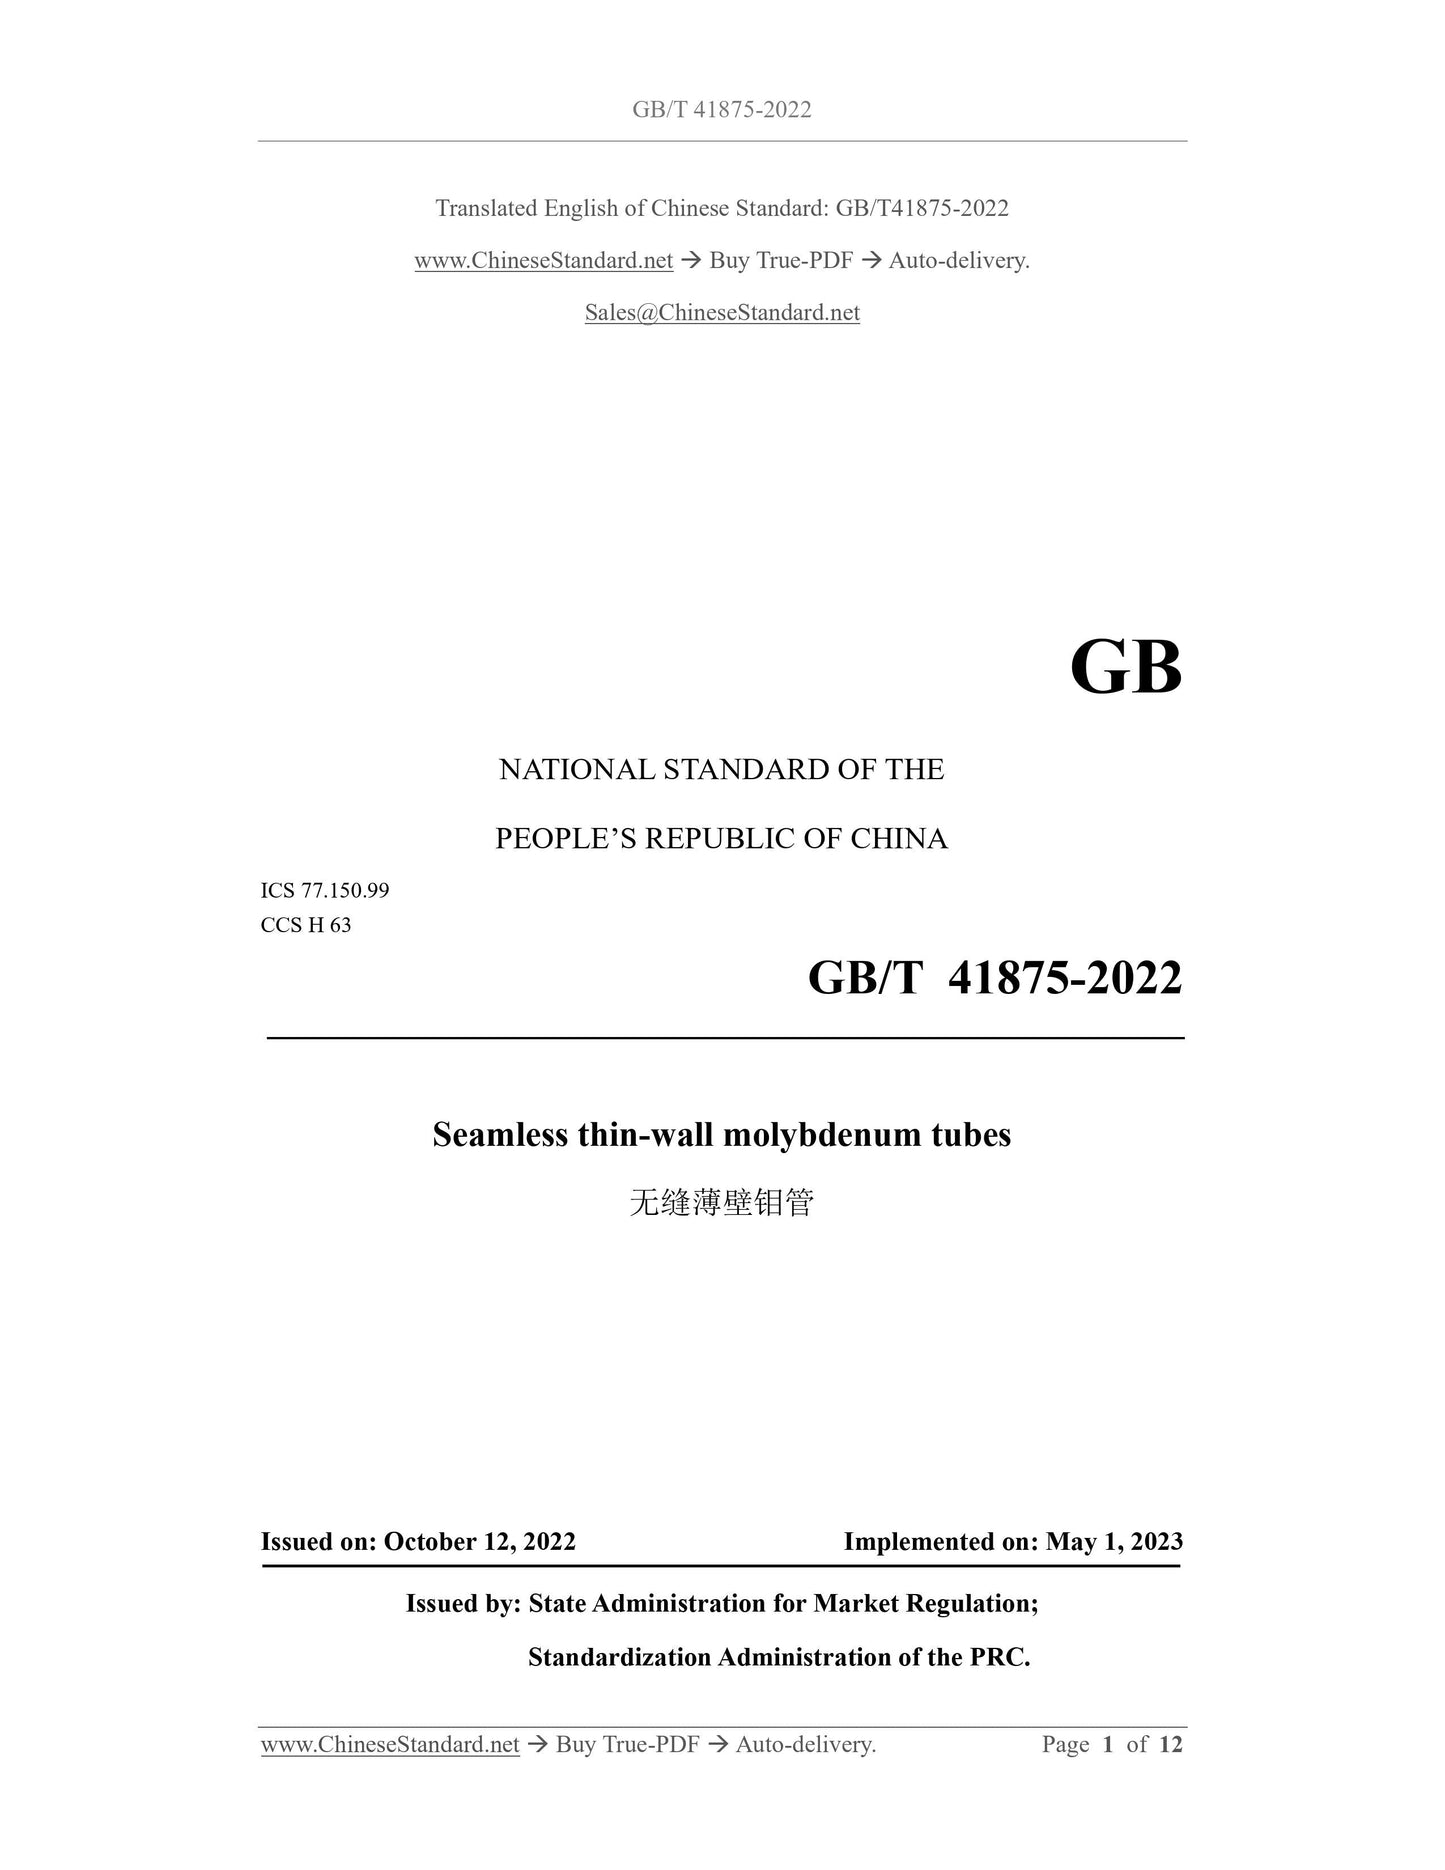 GB/T 41875-2022 Page 1